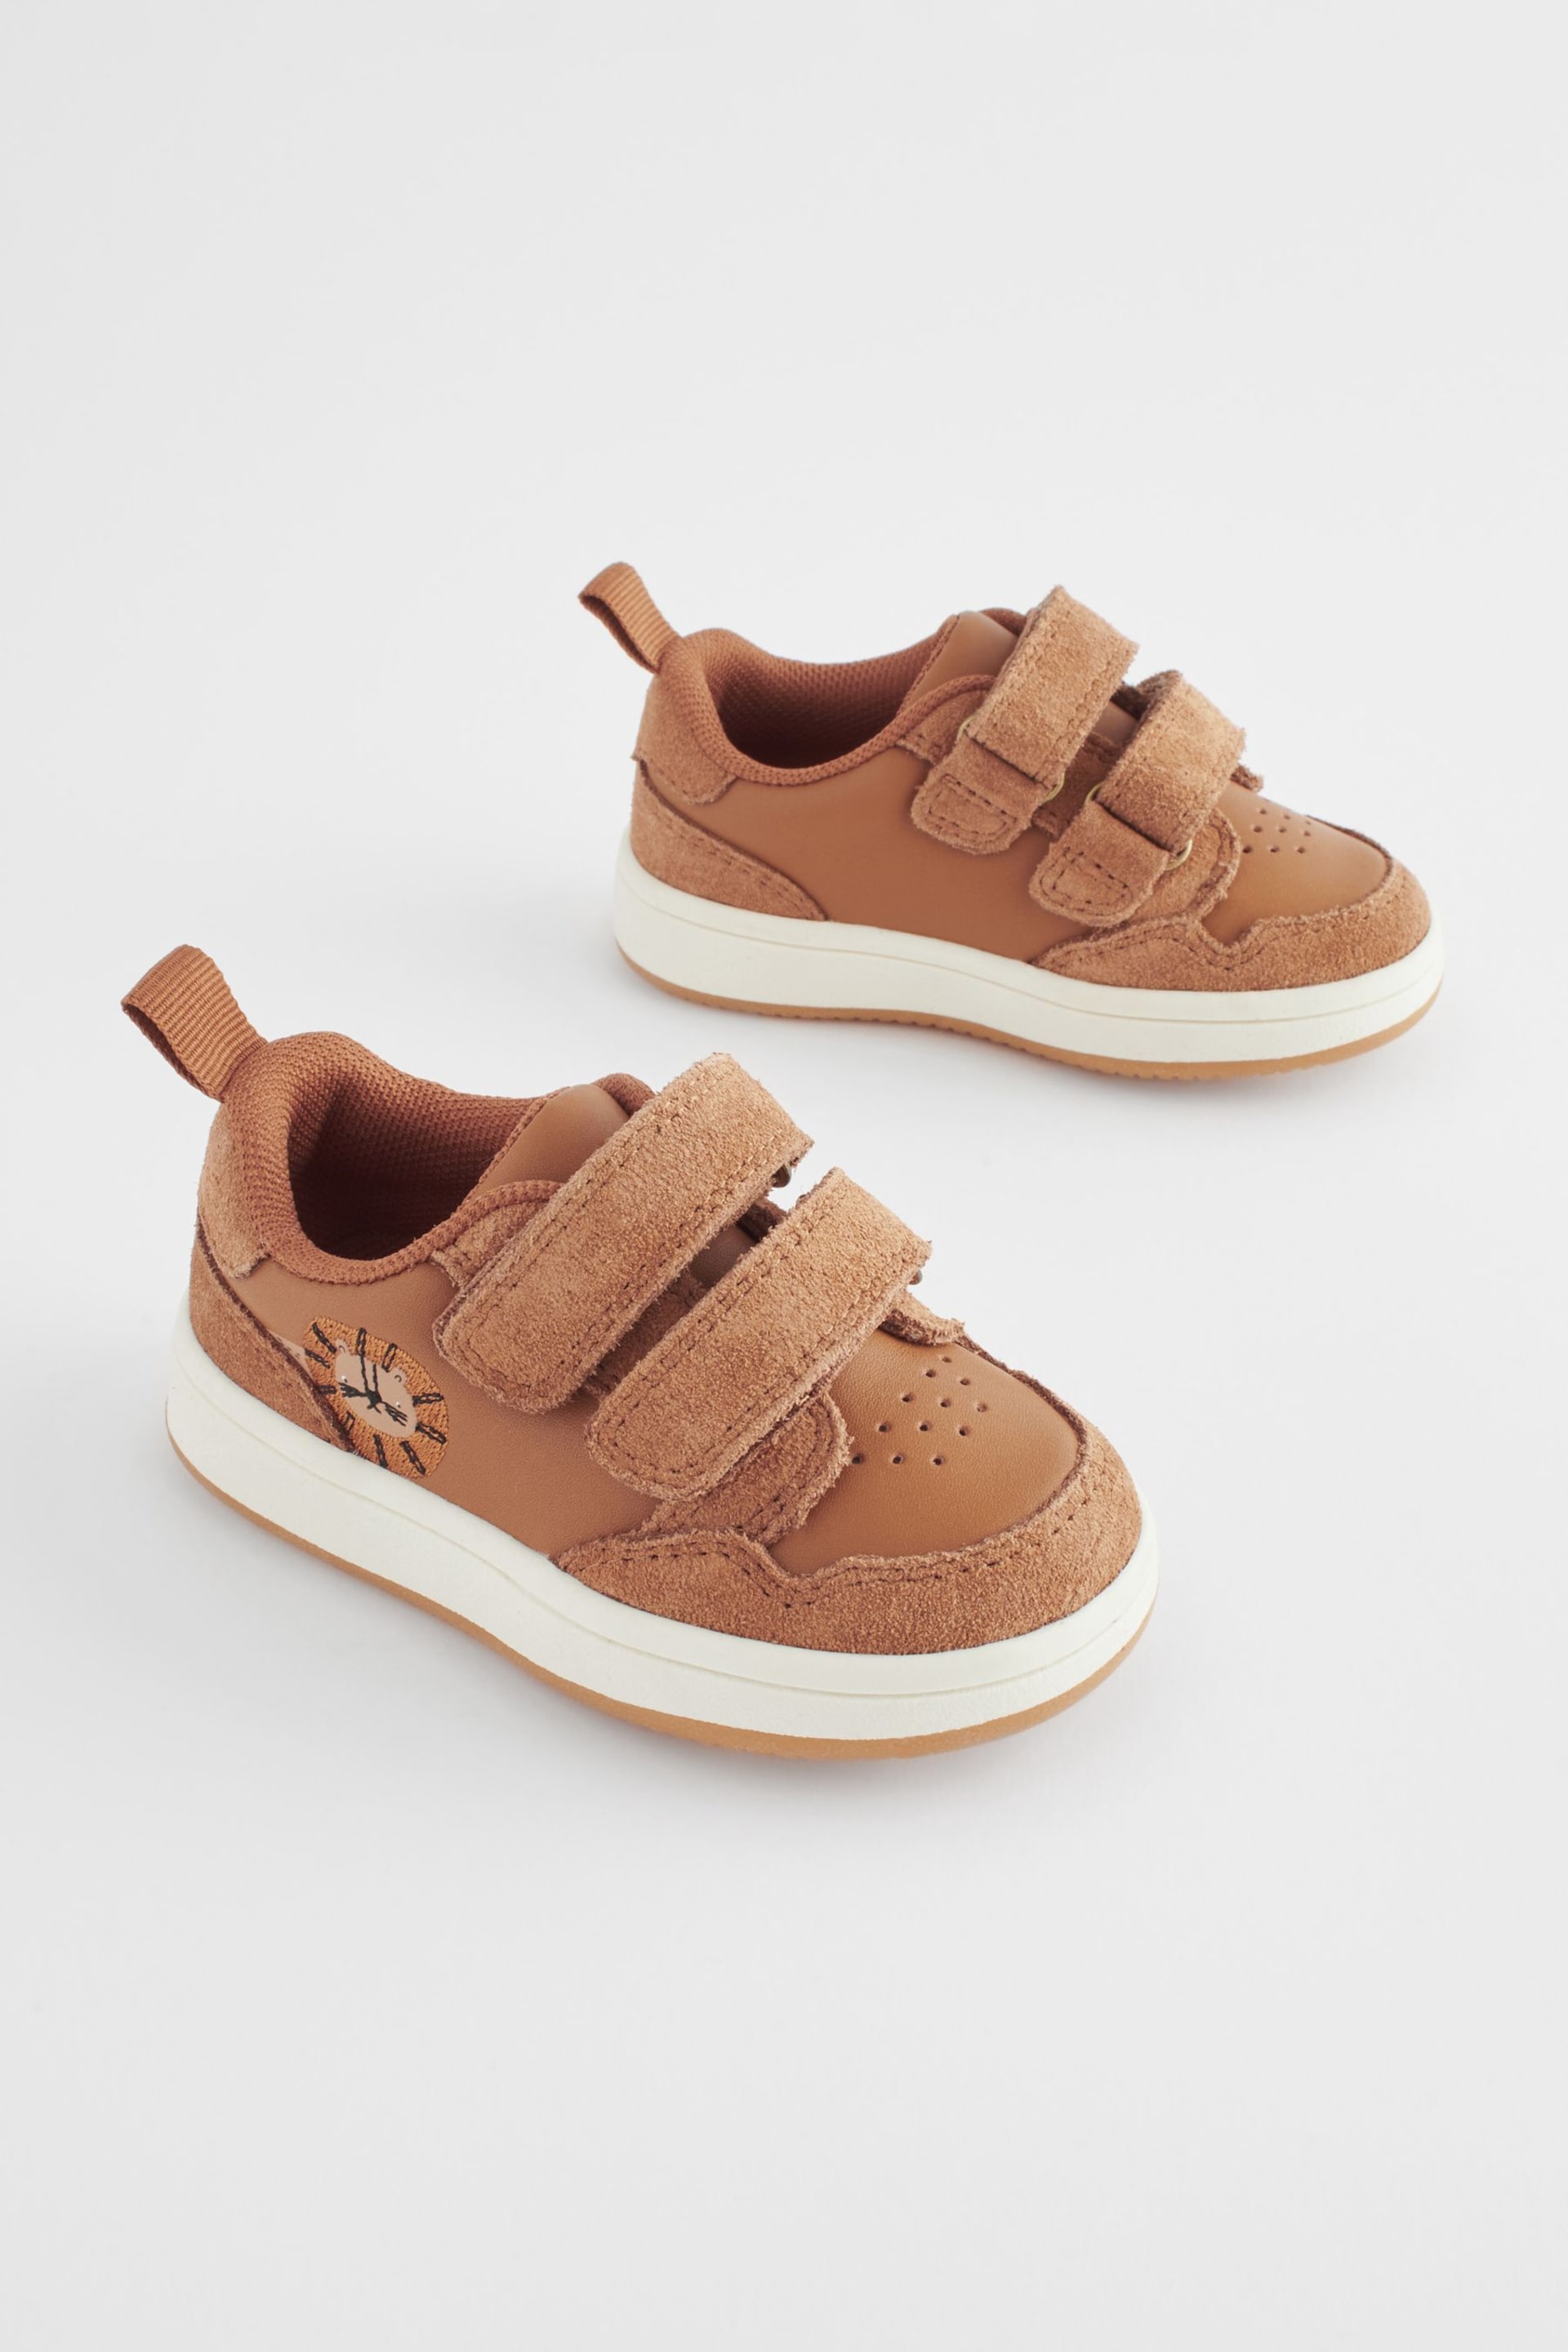 Tan Brown Standard Fit (F) Baby Touch Fastening Leather First Walker Shoes - Image 1 of 7